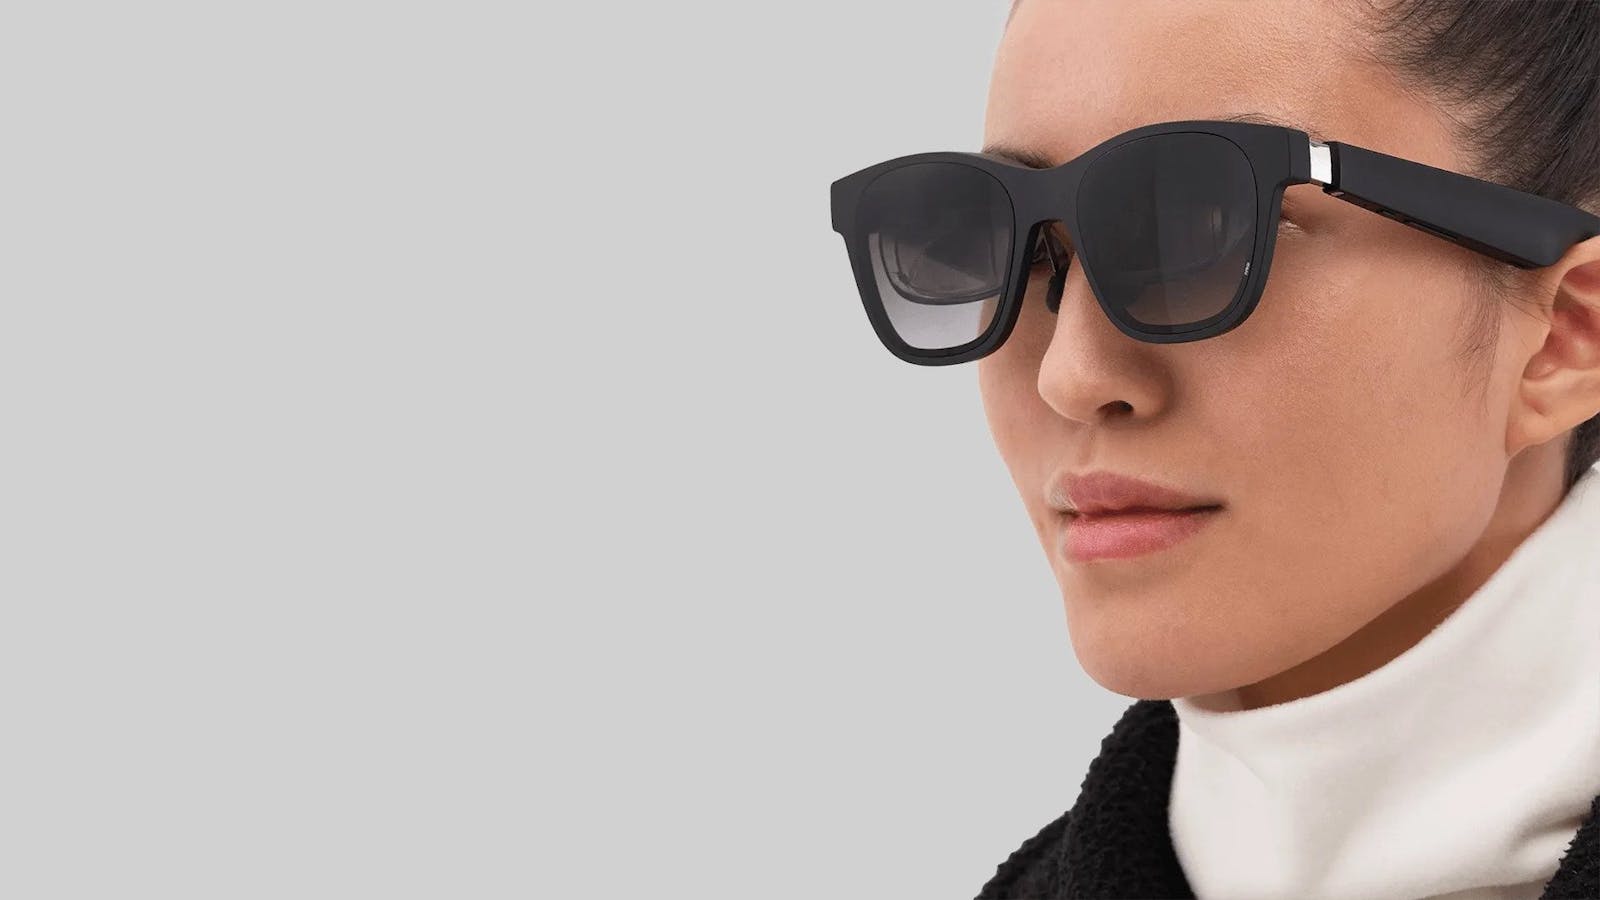 Nreal Air sunglasses let you watch TV in AR